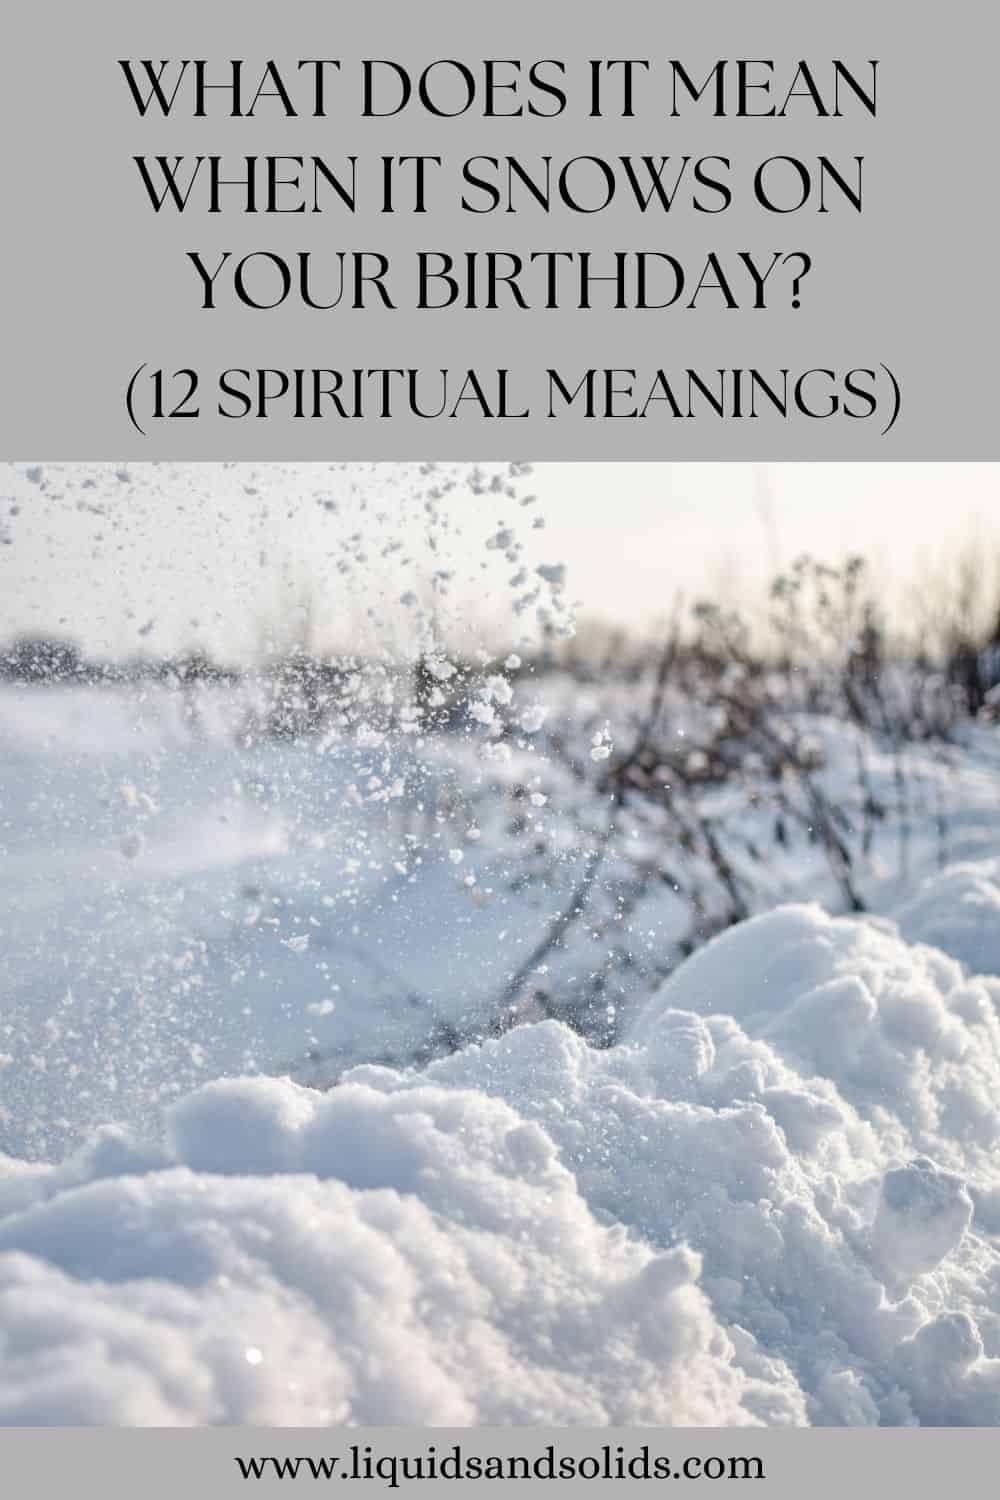 What Does It Mean When It Snows On Your Birthday? (12 Spiritual Meanings)